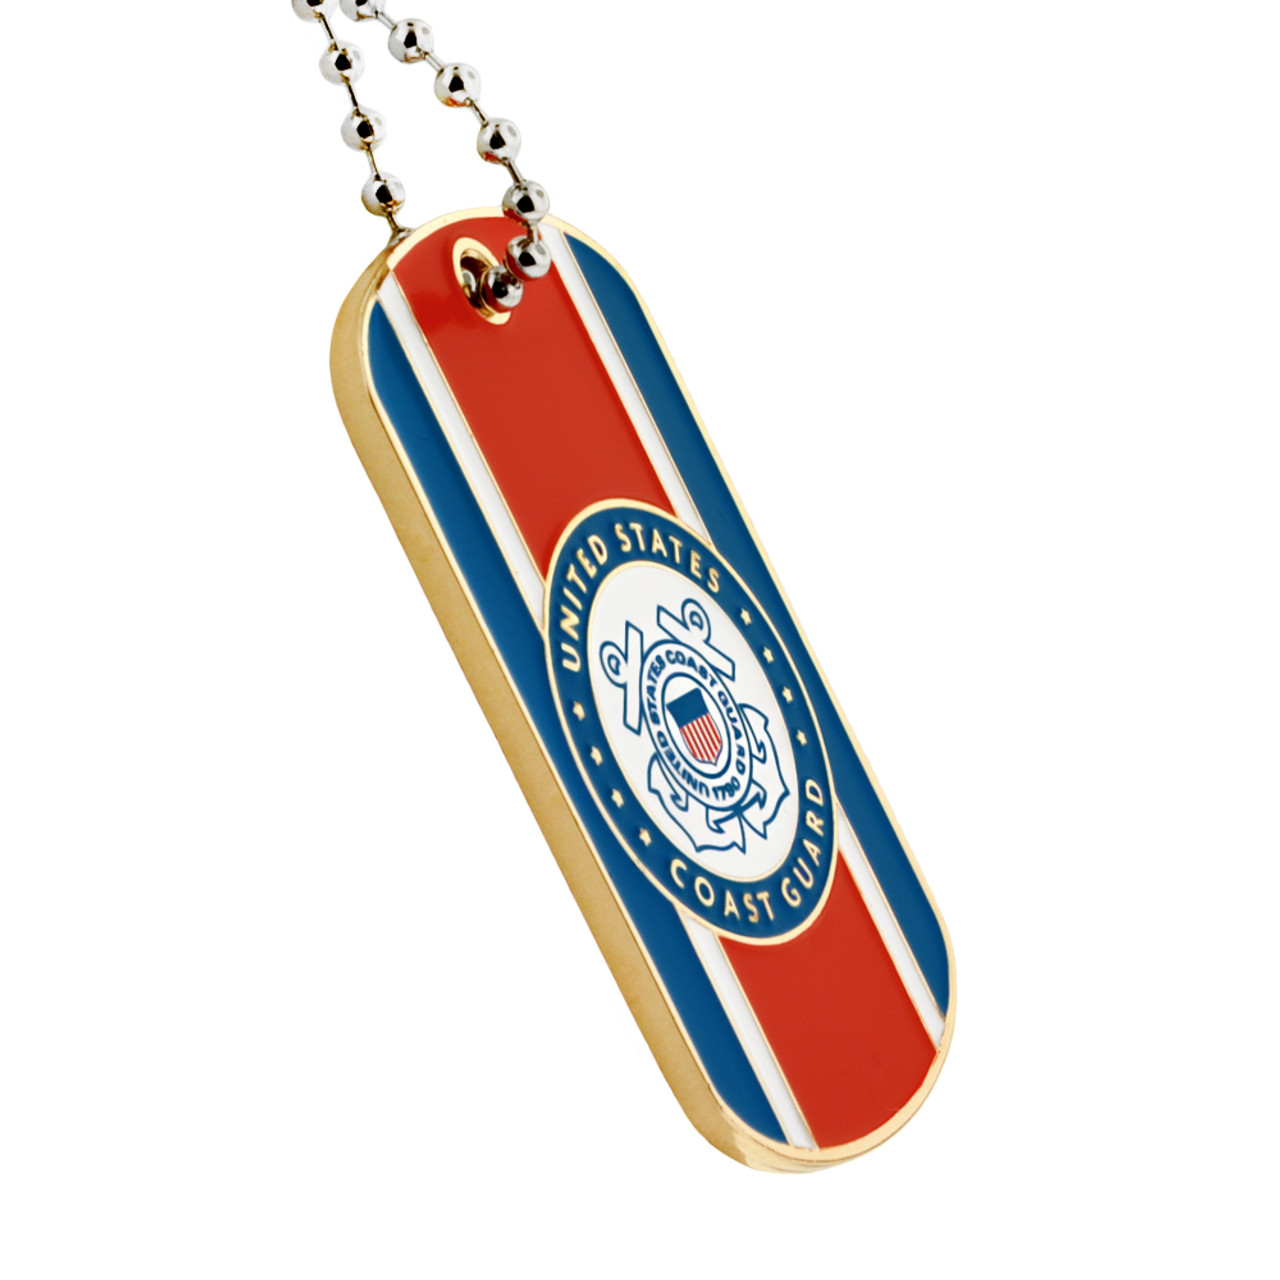 Officially Licensed U.S. Navy Dog Tag Pin - PinMart